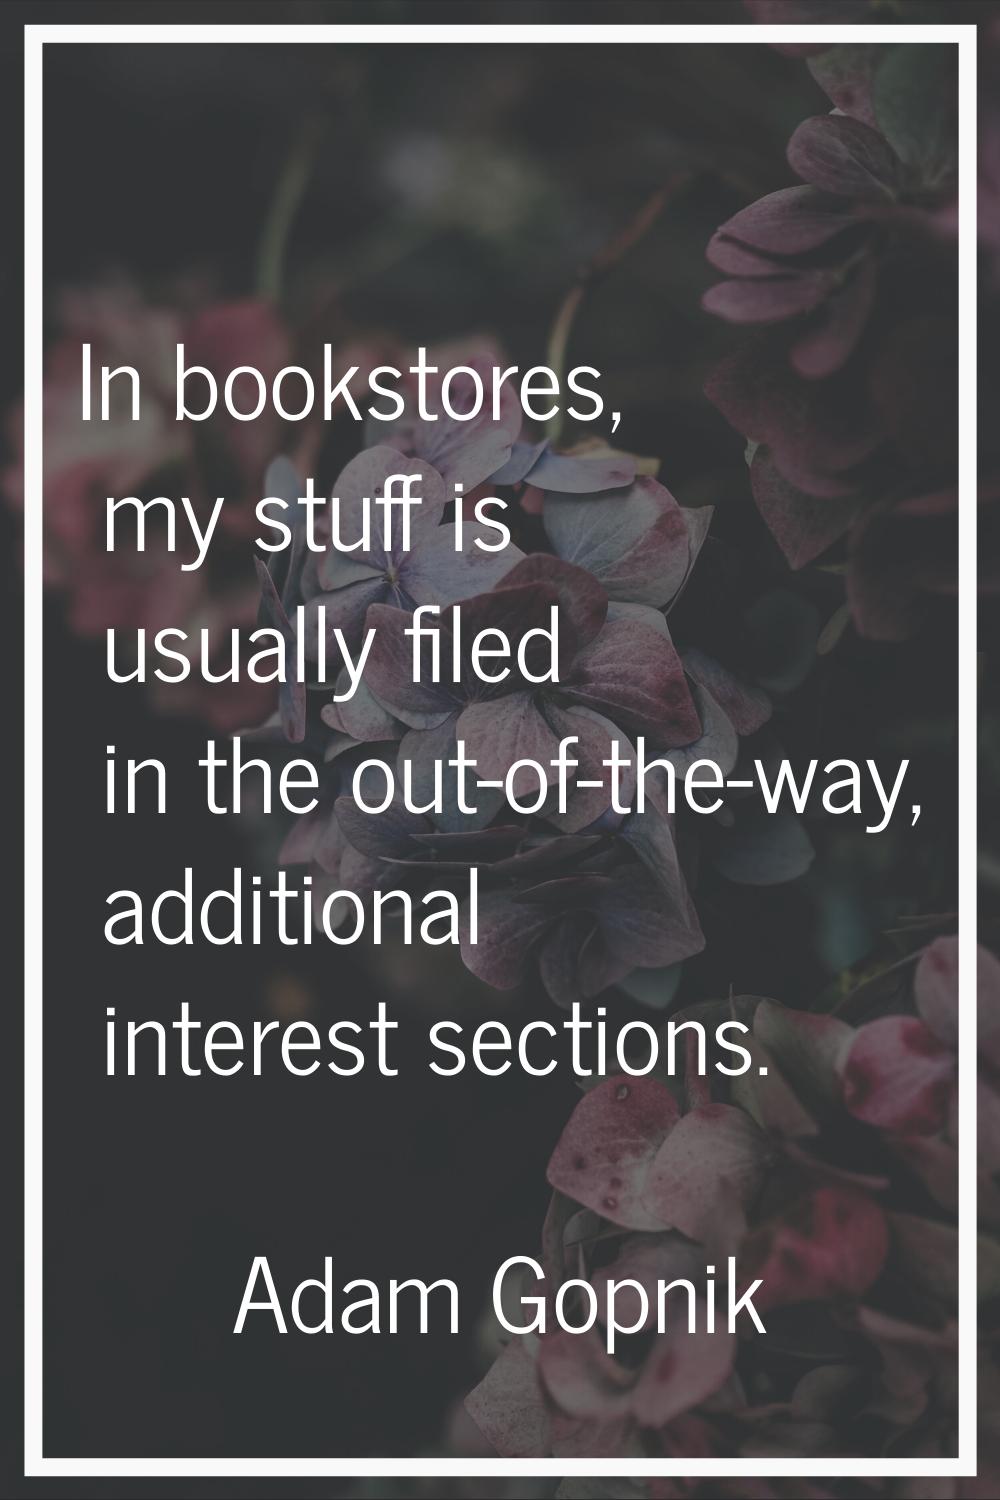 In bookstores, my stuff is usually filed in the out-of-the-way, additional interest sections.